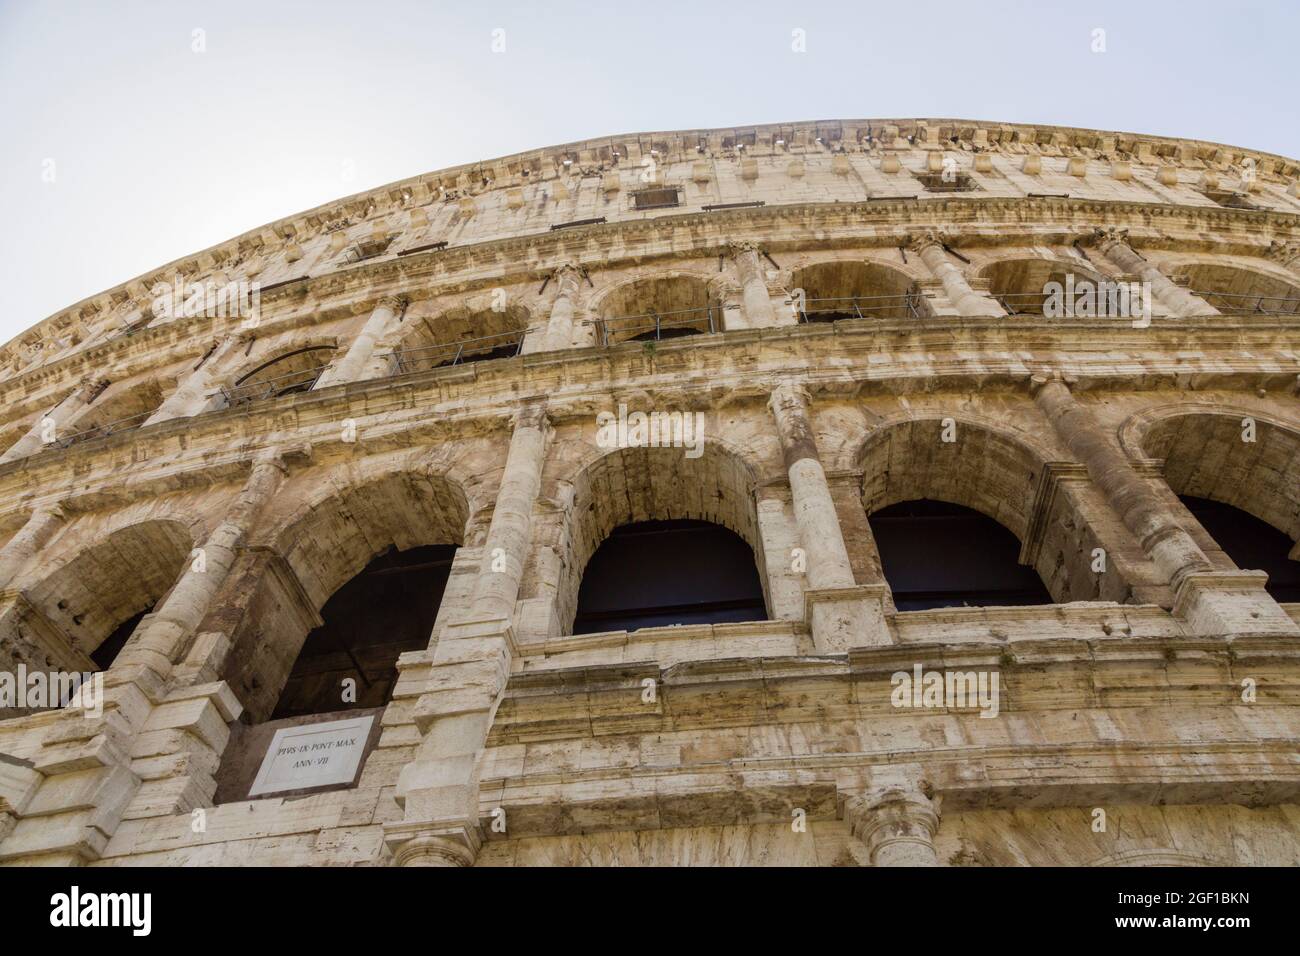 The Colosseum, Rome, Italy Stock Photo